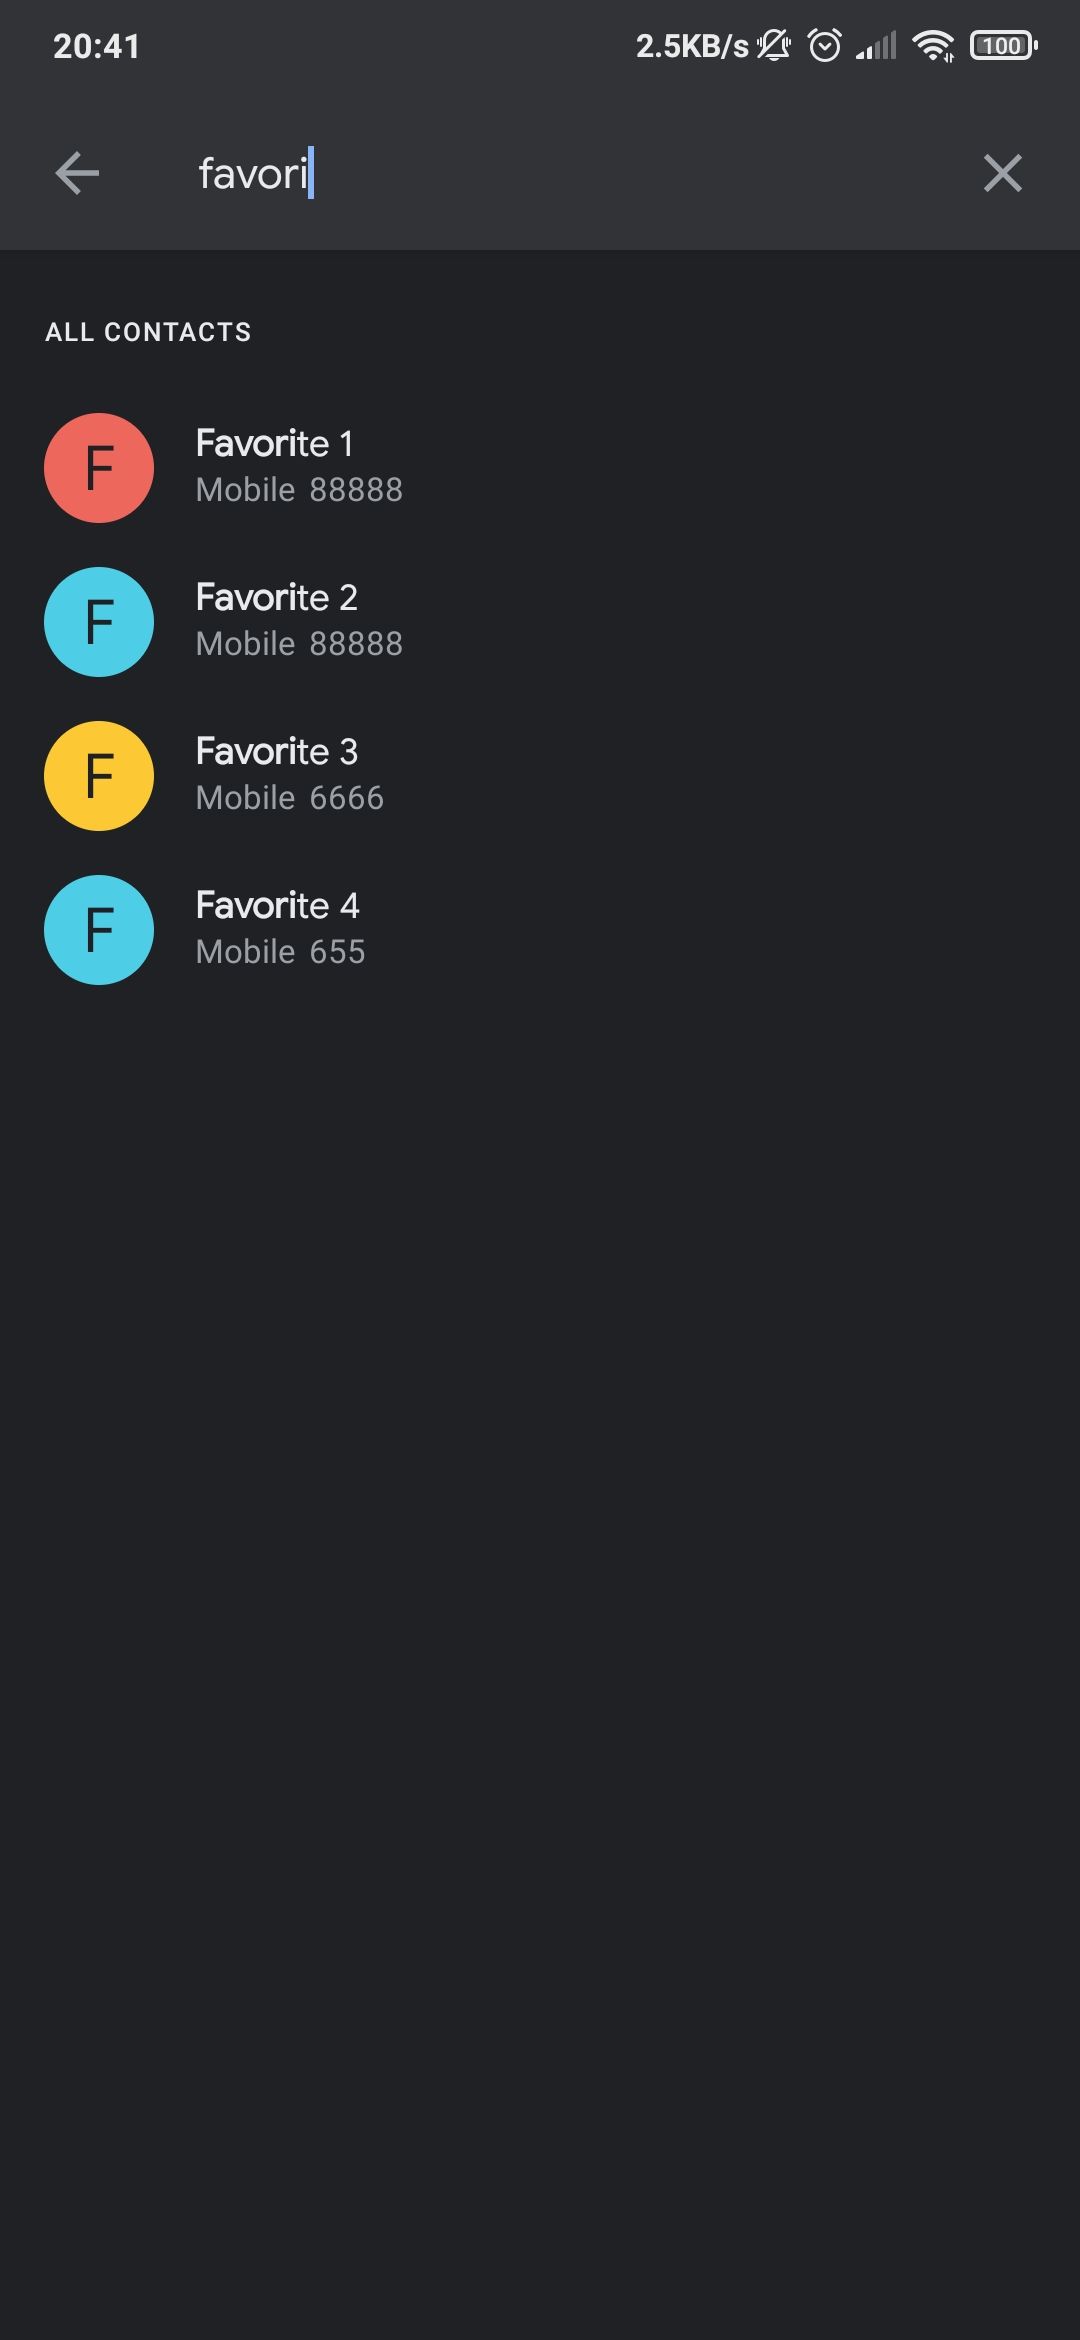 Android phone app favorites manage